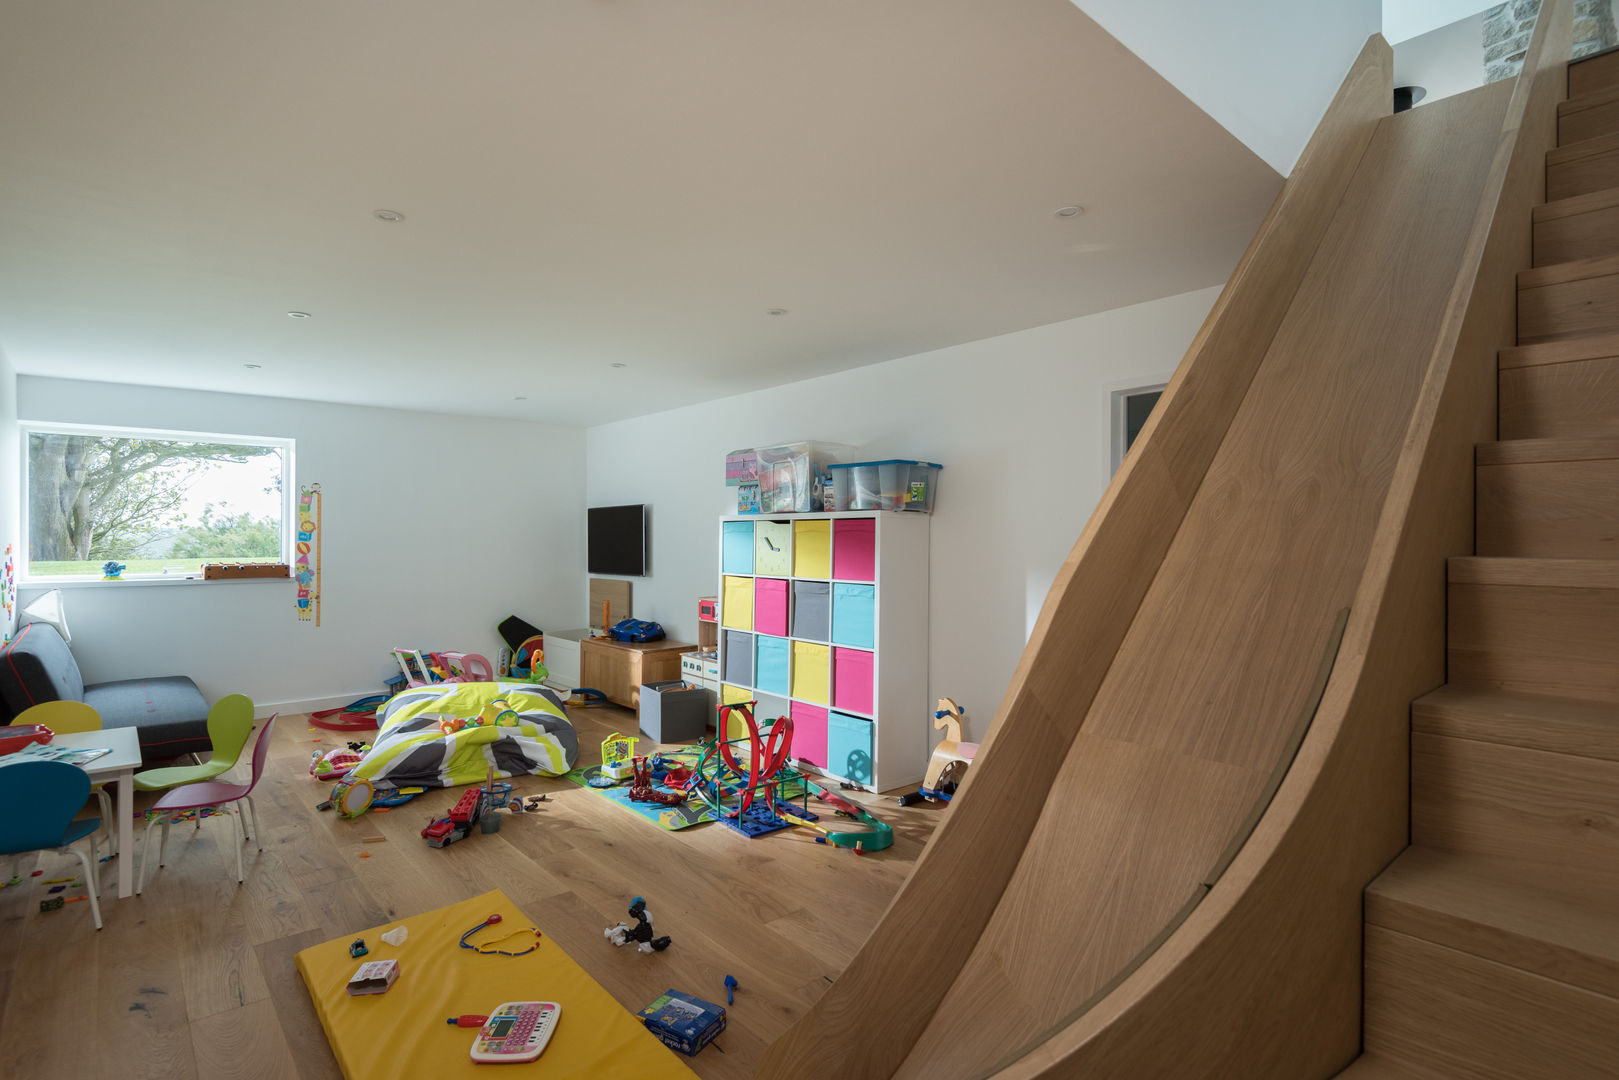 Contemporary Replacement Dwelling, Cubert, Laurence Associates Laurence Associates Chambre d'enfant moderne play room,game room,internal slide,fun,games,storage,children,toys,modular storage,bright colours,play,kids room